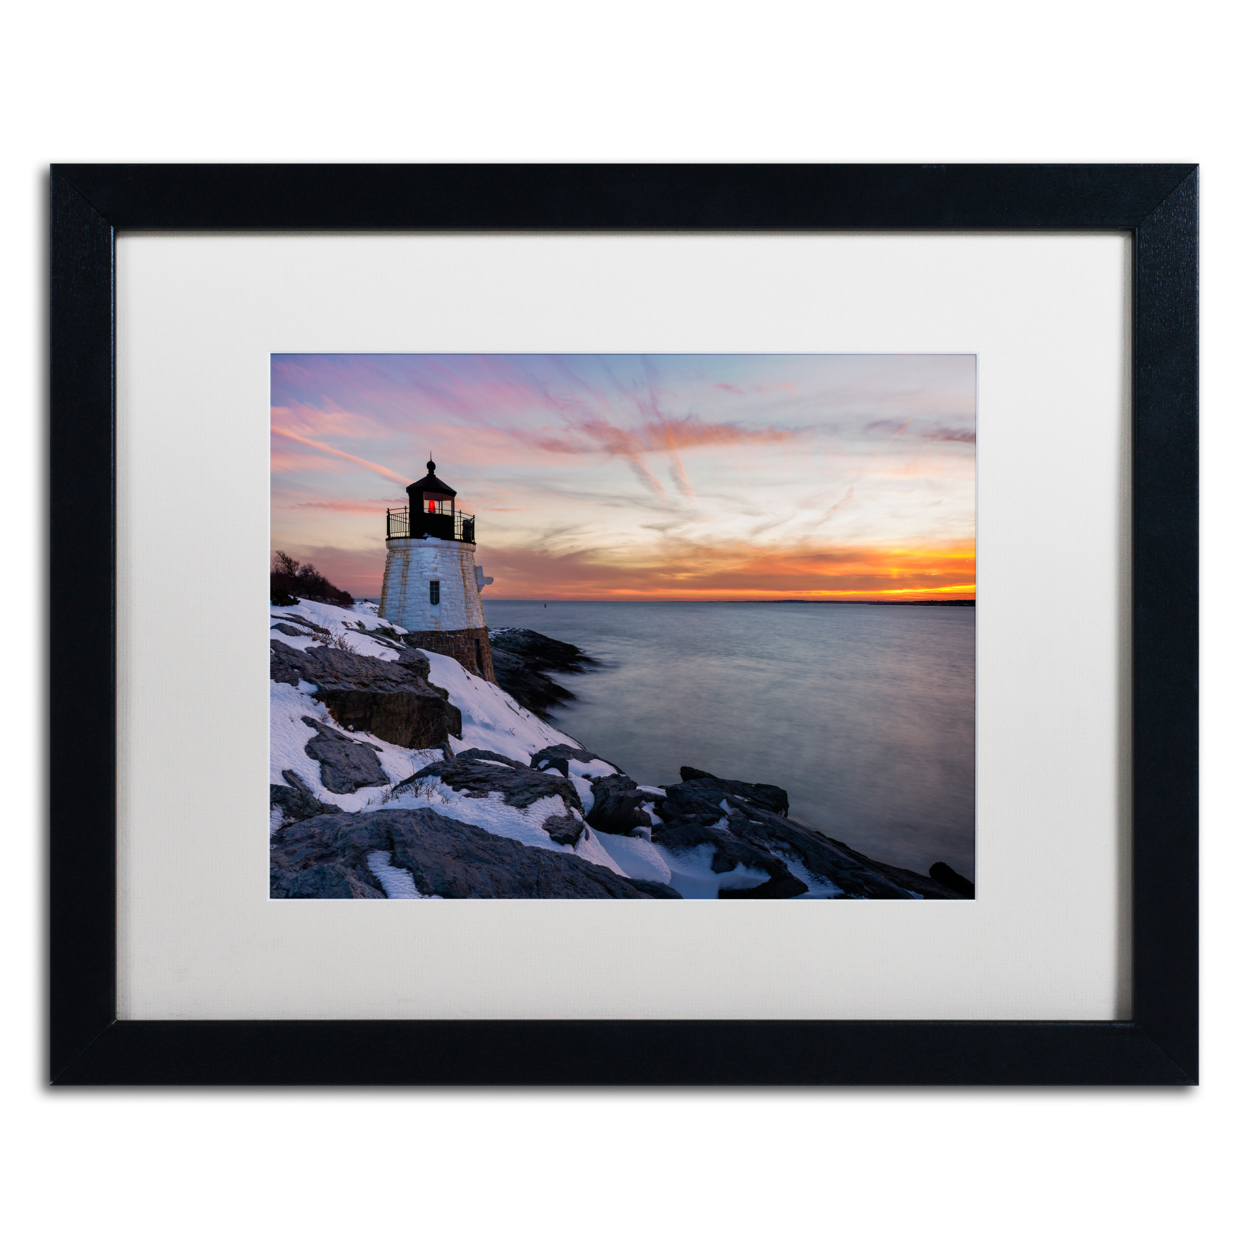 Michael Blanchette Photography 'Day's End' Black Wooden Framed Art 18 X 22 Inches